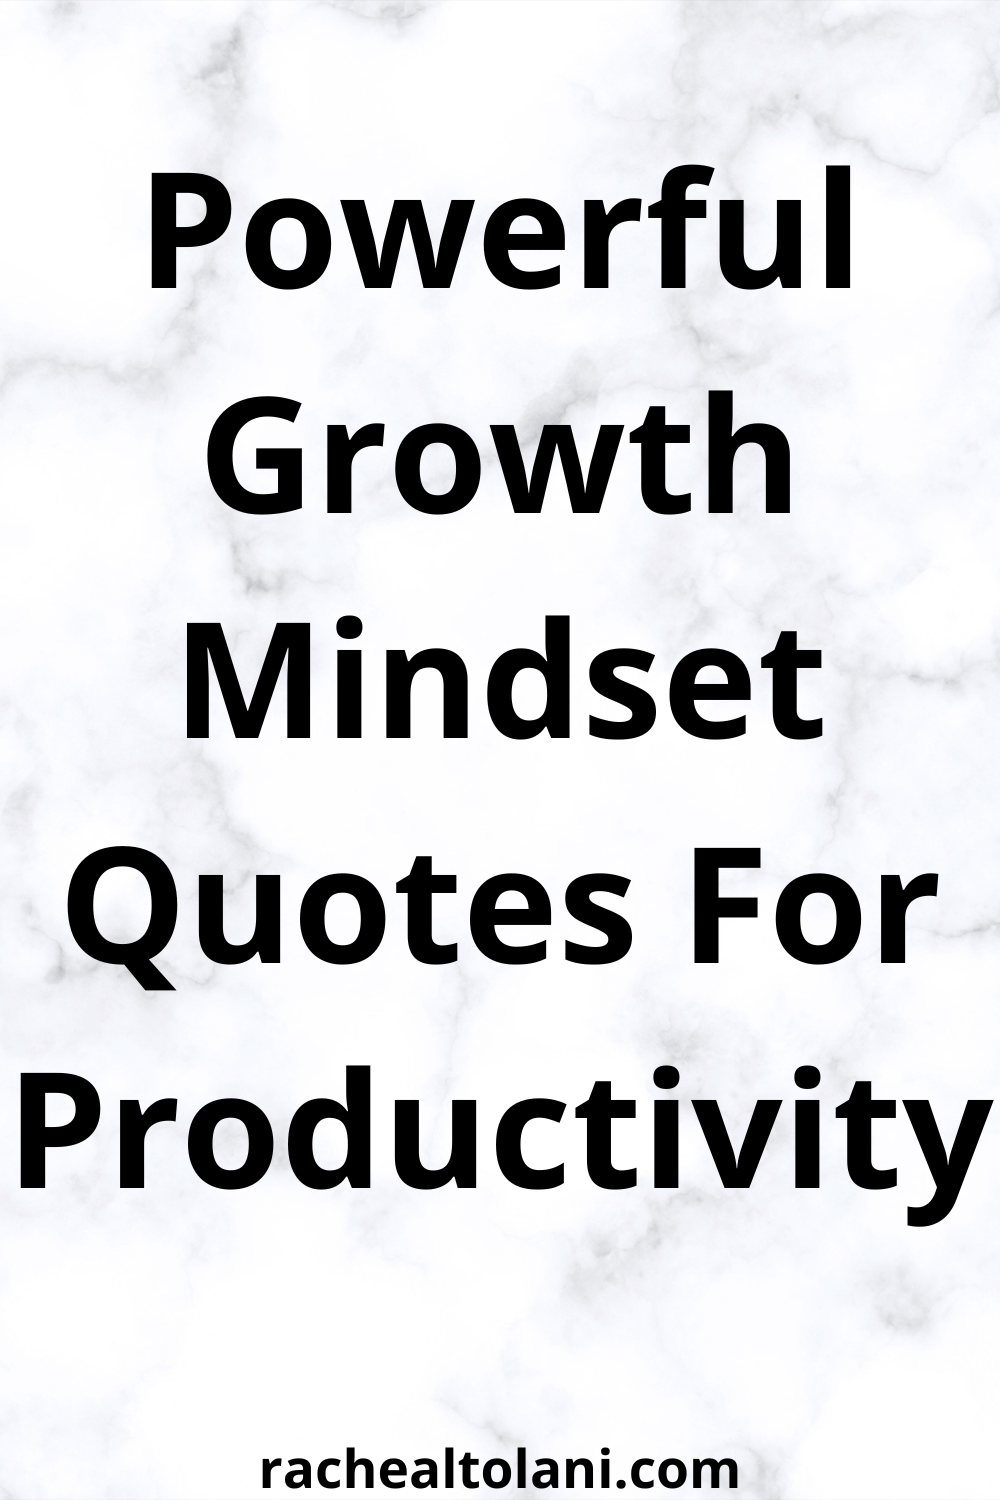 Growth Mindset Quotes